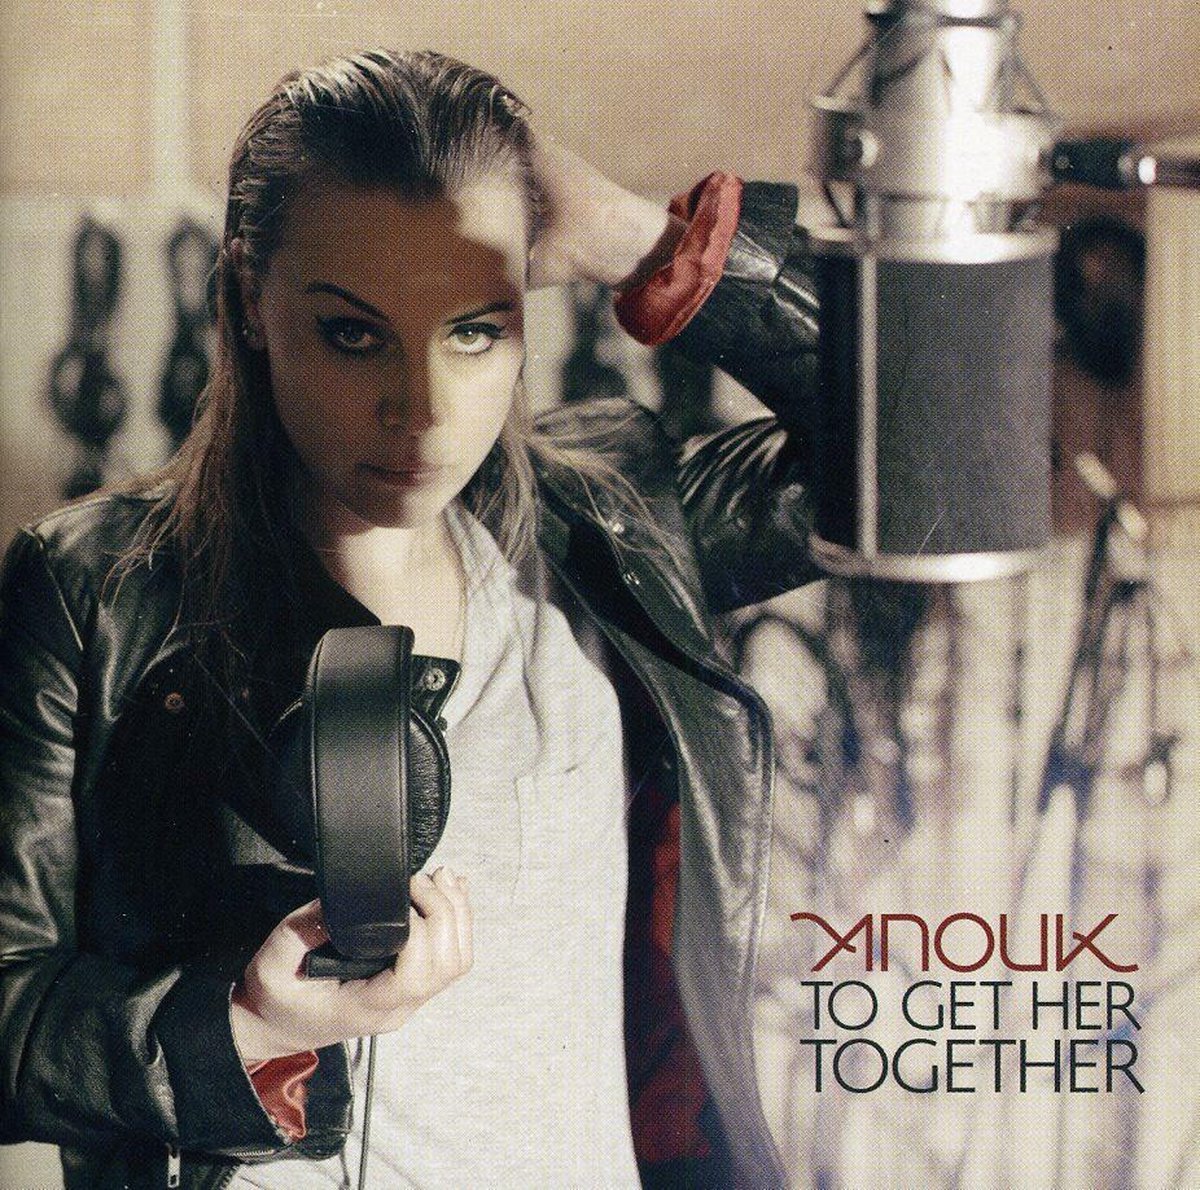 Anouk - To get her together